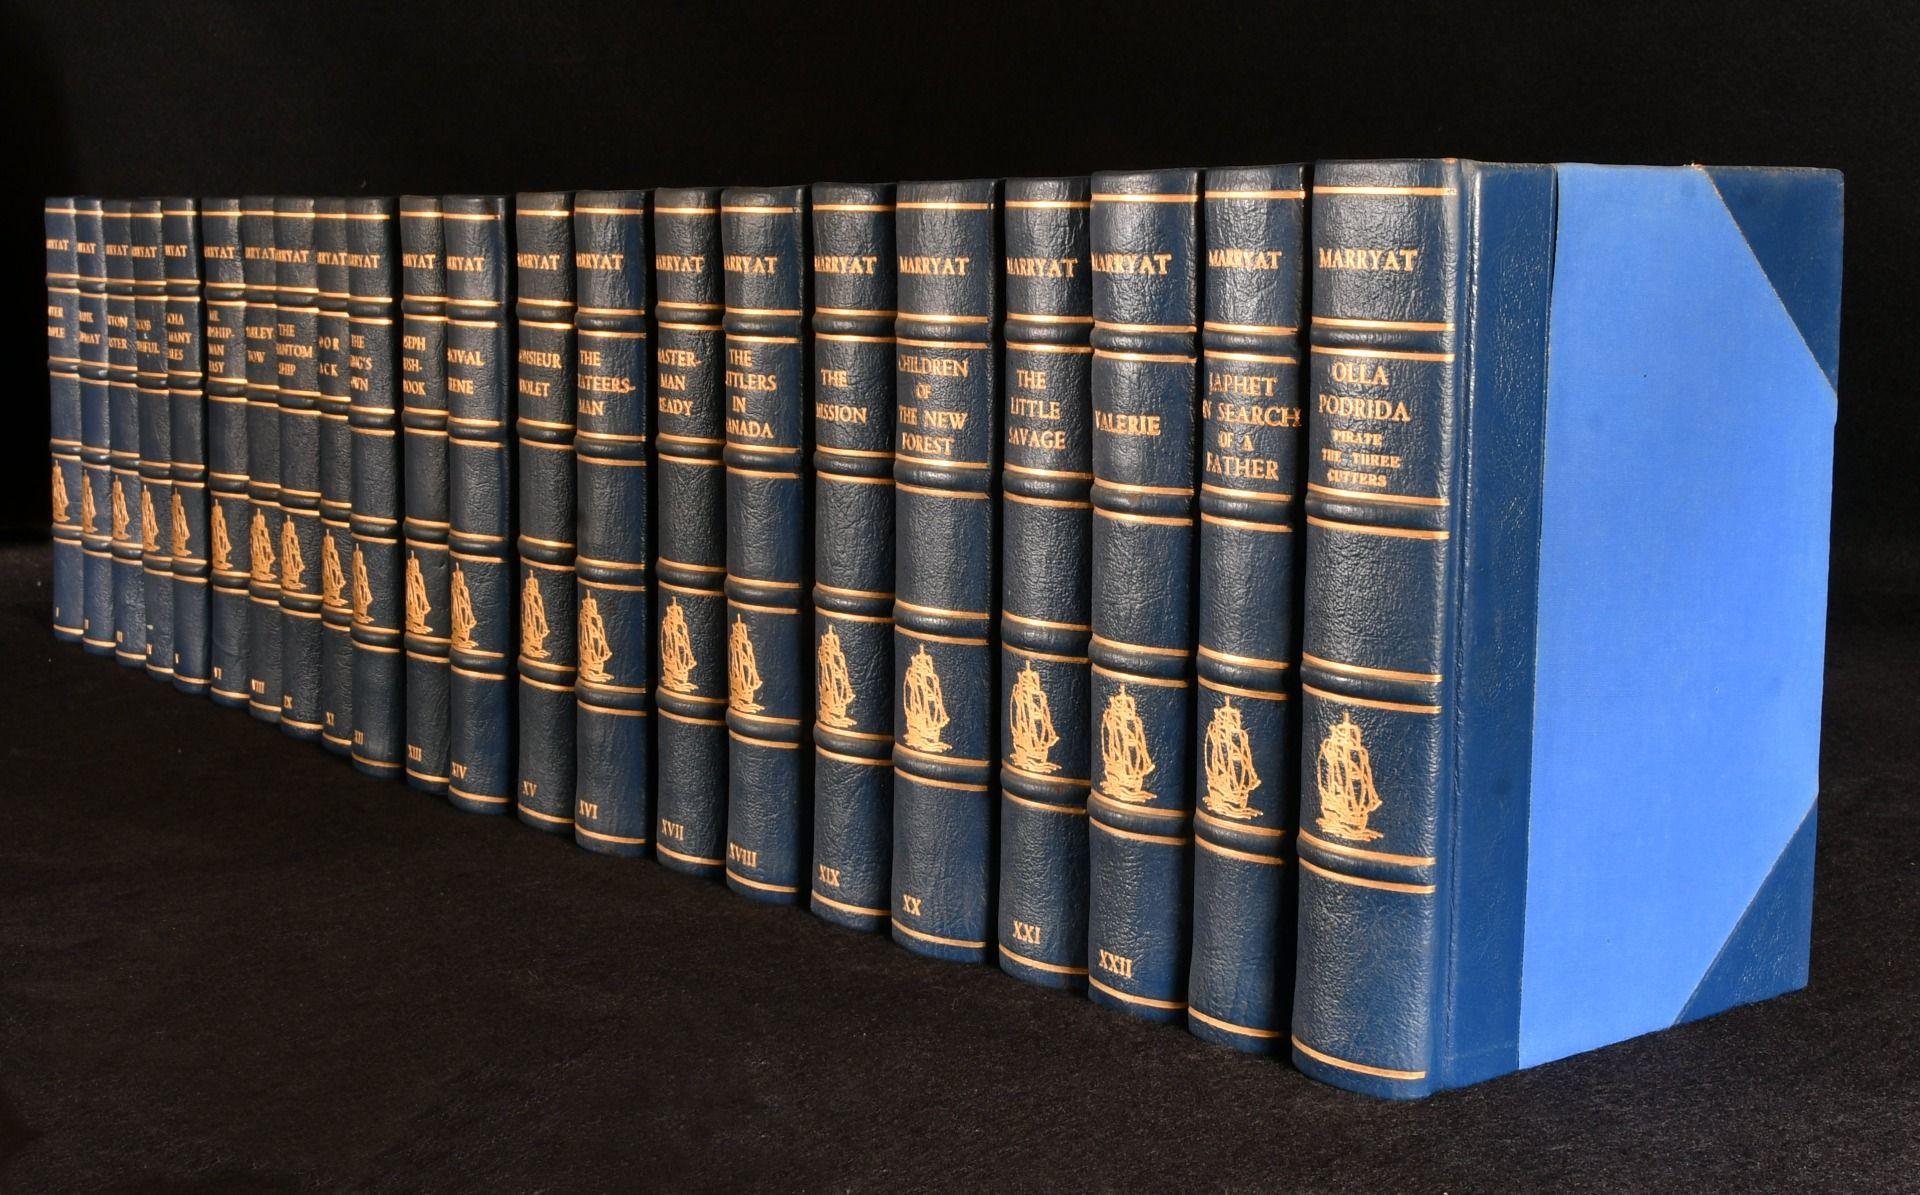 A superb set of the novels of Captain Marryat, elegantly and uniformly bound in half morocco, and illustrated throughout.

A twenty-two volume set in half morocco bindings, with pictorial gilt to the spines. All edges gilt.

Captain Frederick